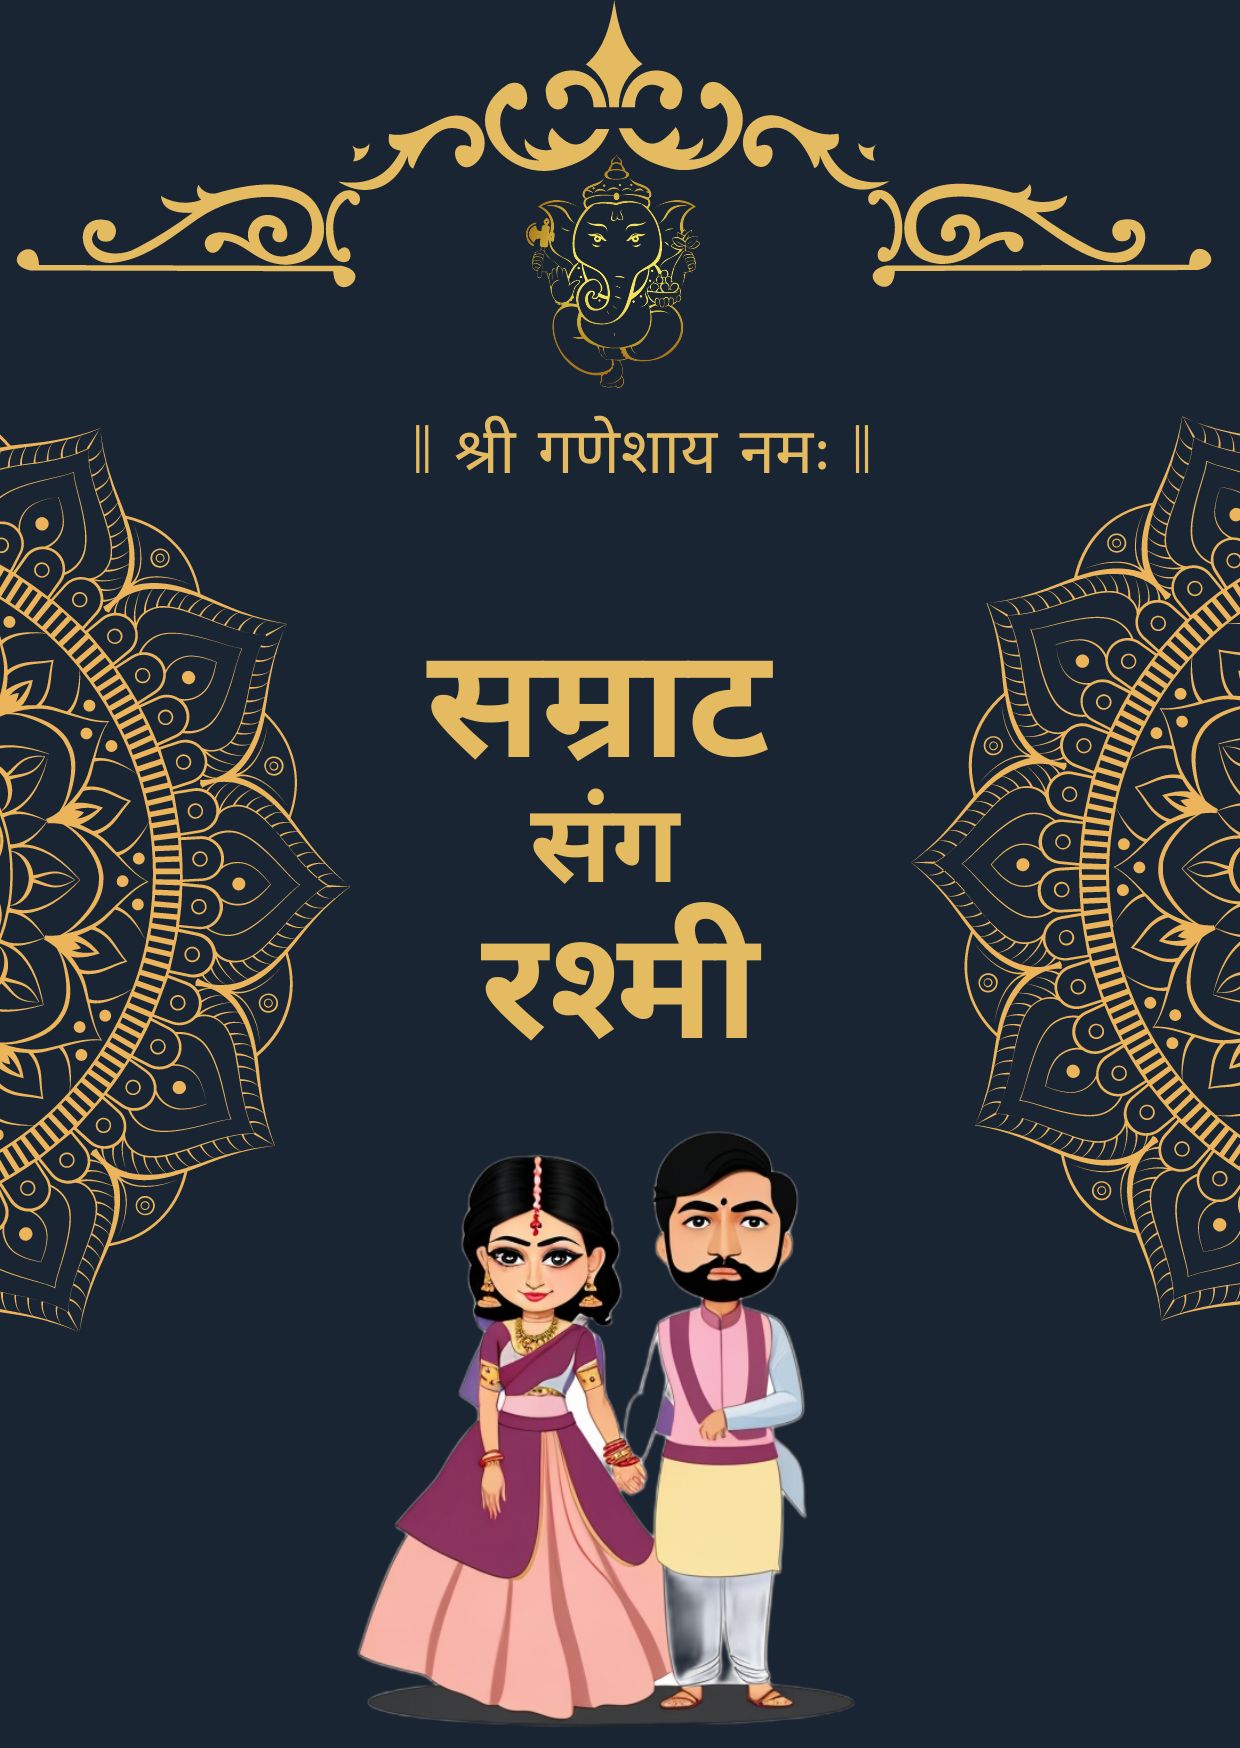 marriage card format in hindi